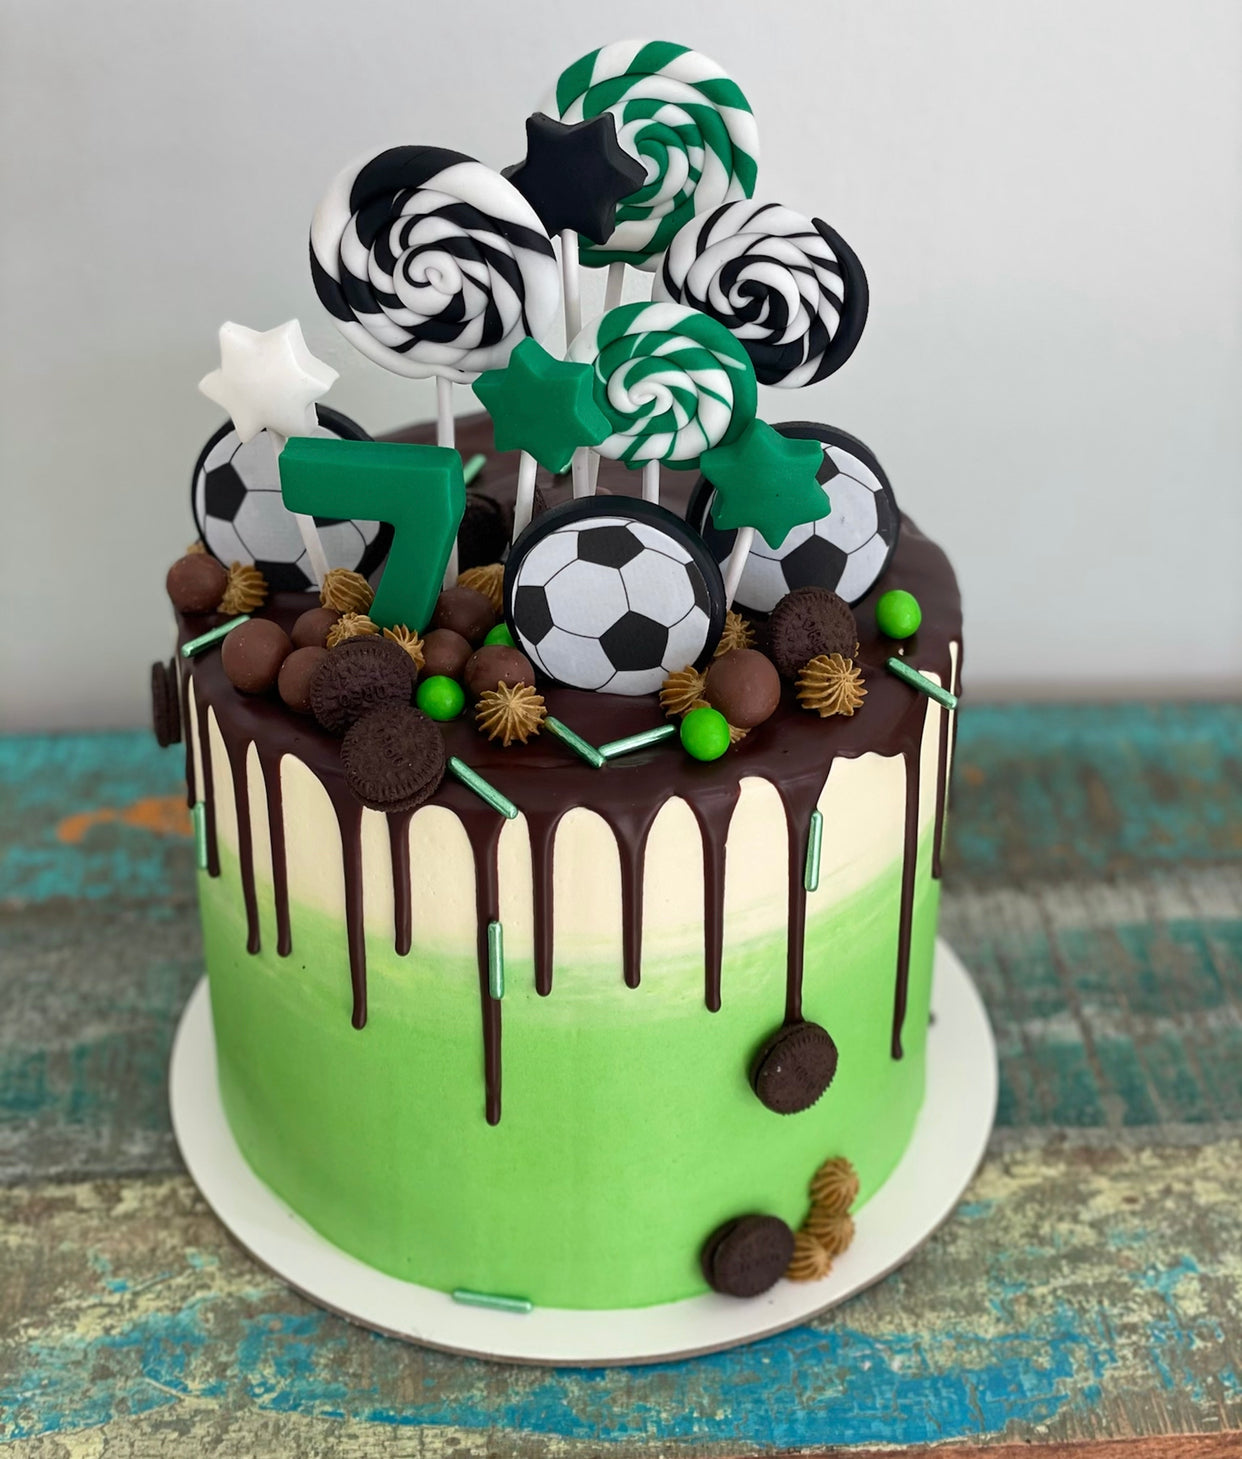 6" SOCCER STANDOUT cake